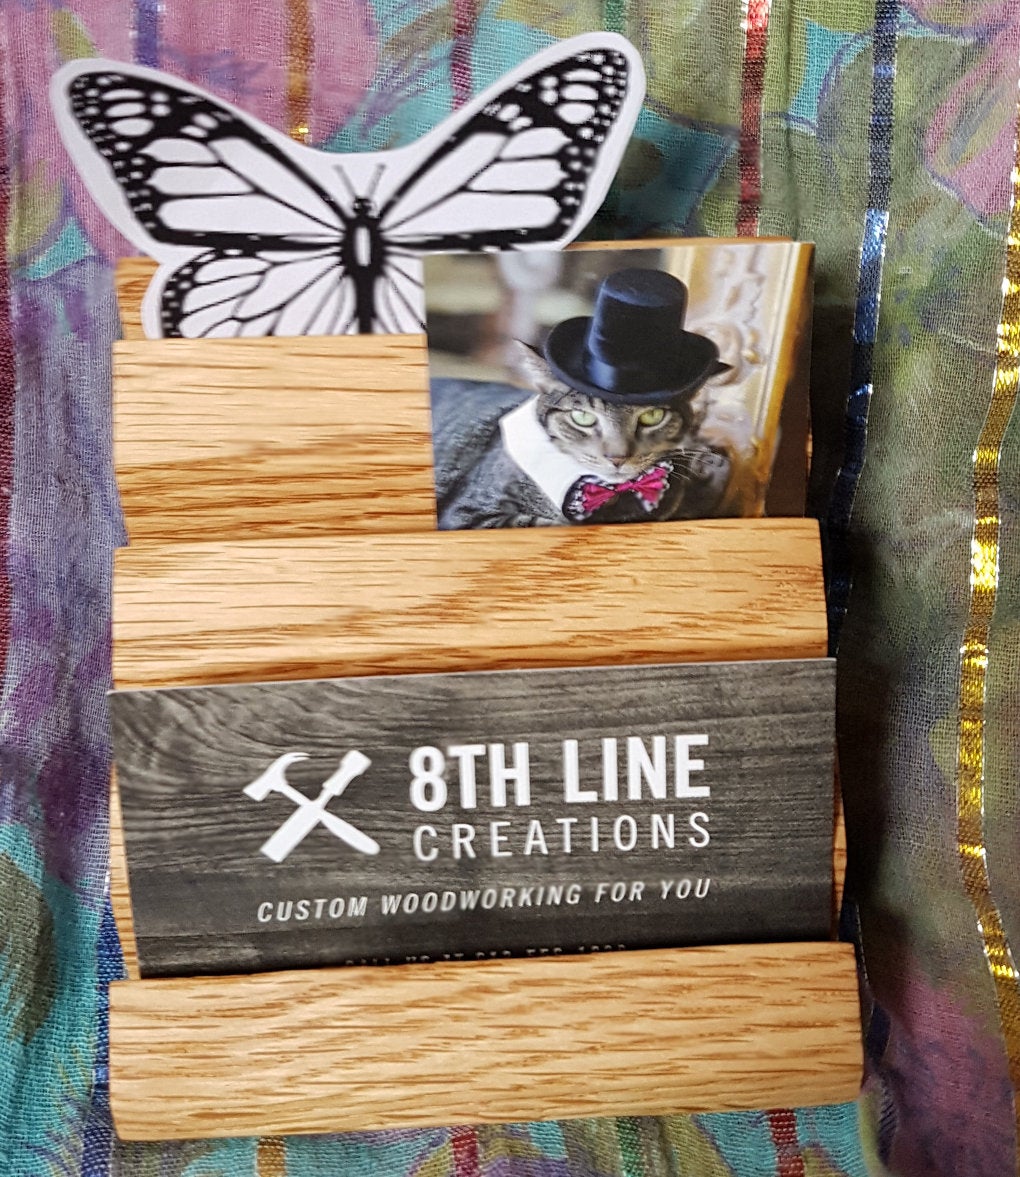 Business Card Display - Black - 4 Card Business Card Holders 8th Line Creations 